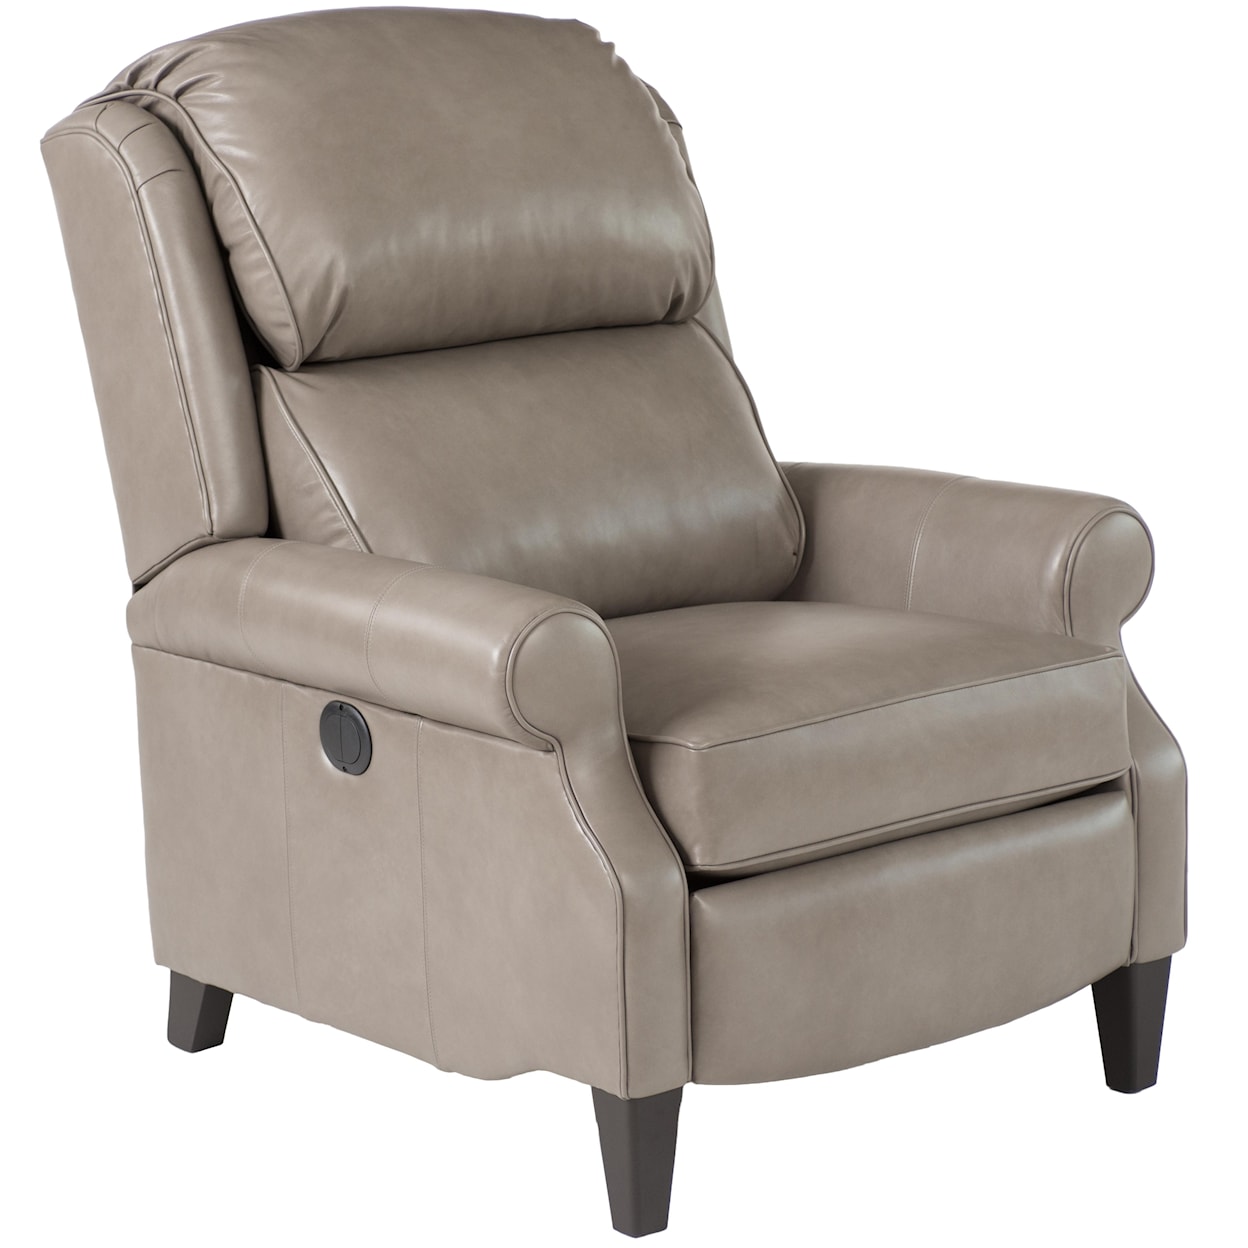 Smith Brothers Smith Brothers Traditional Motorized Reclining Chair